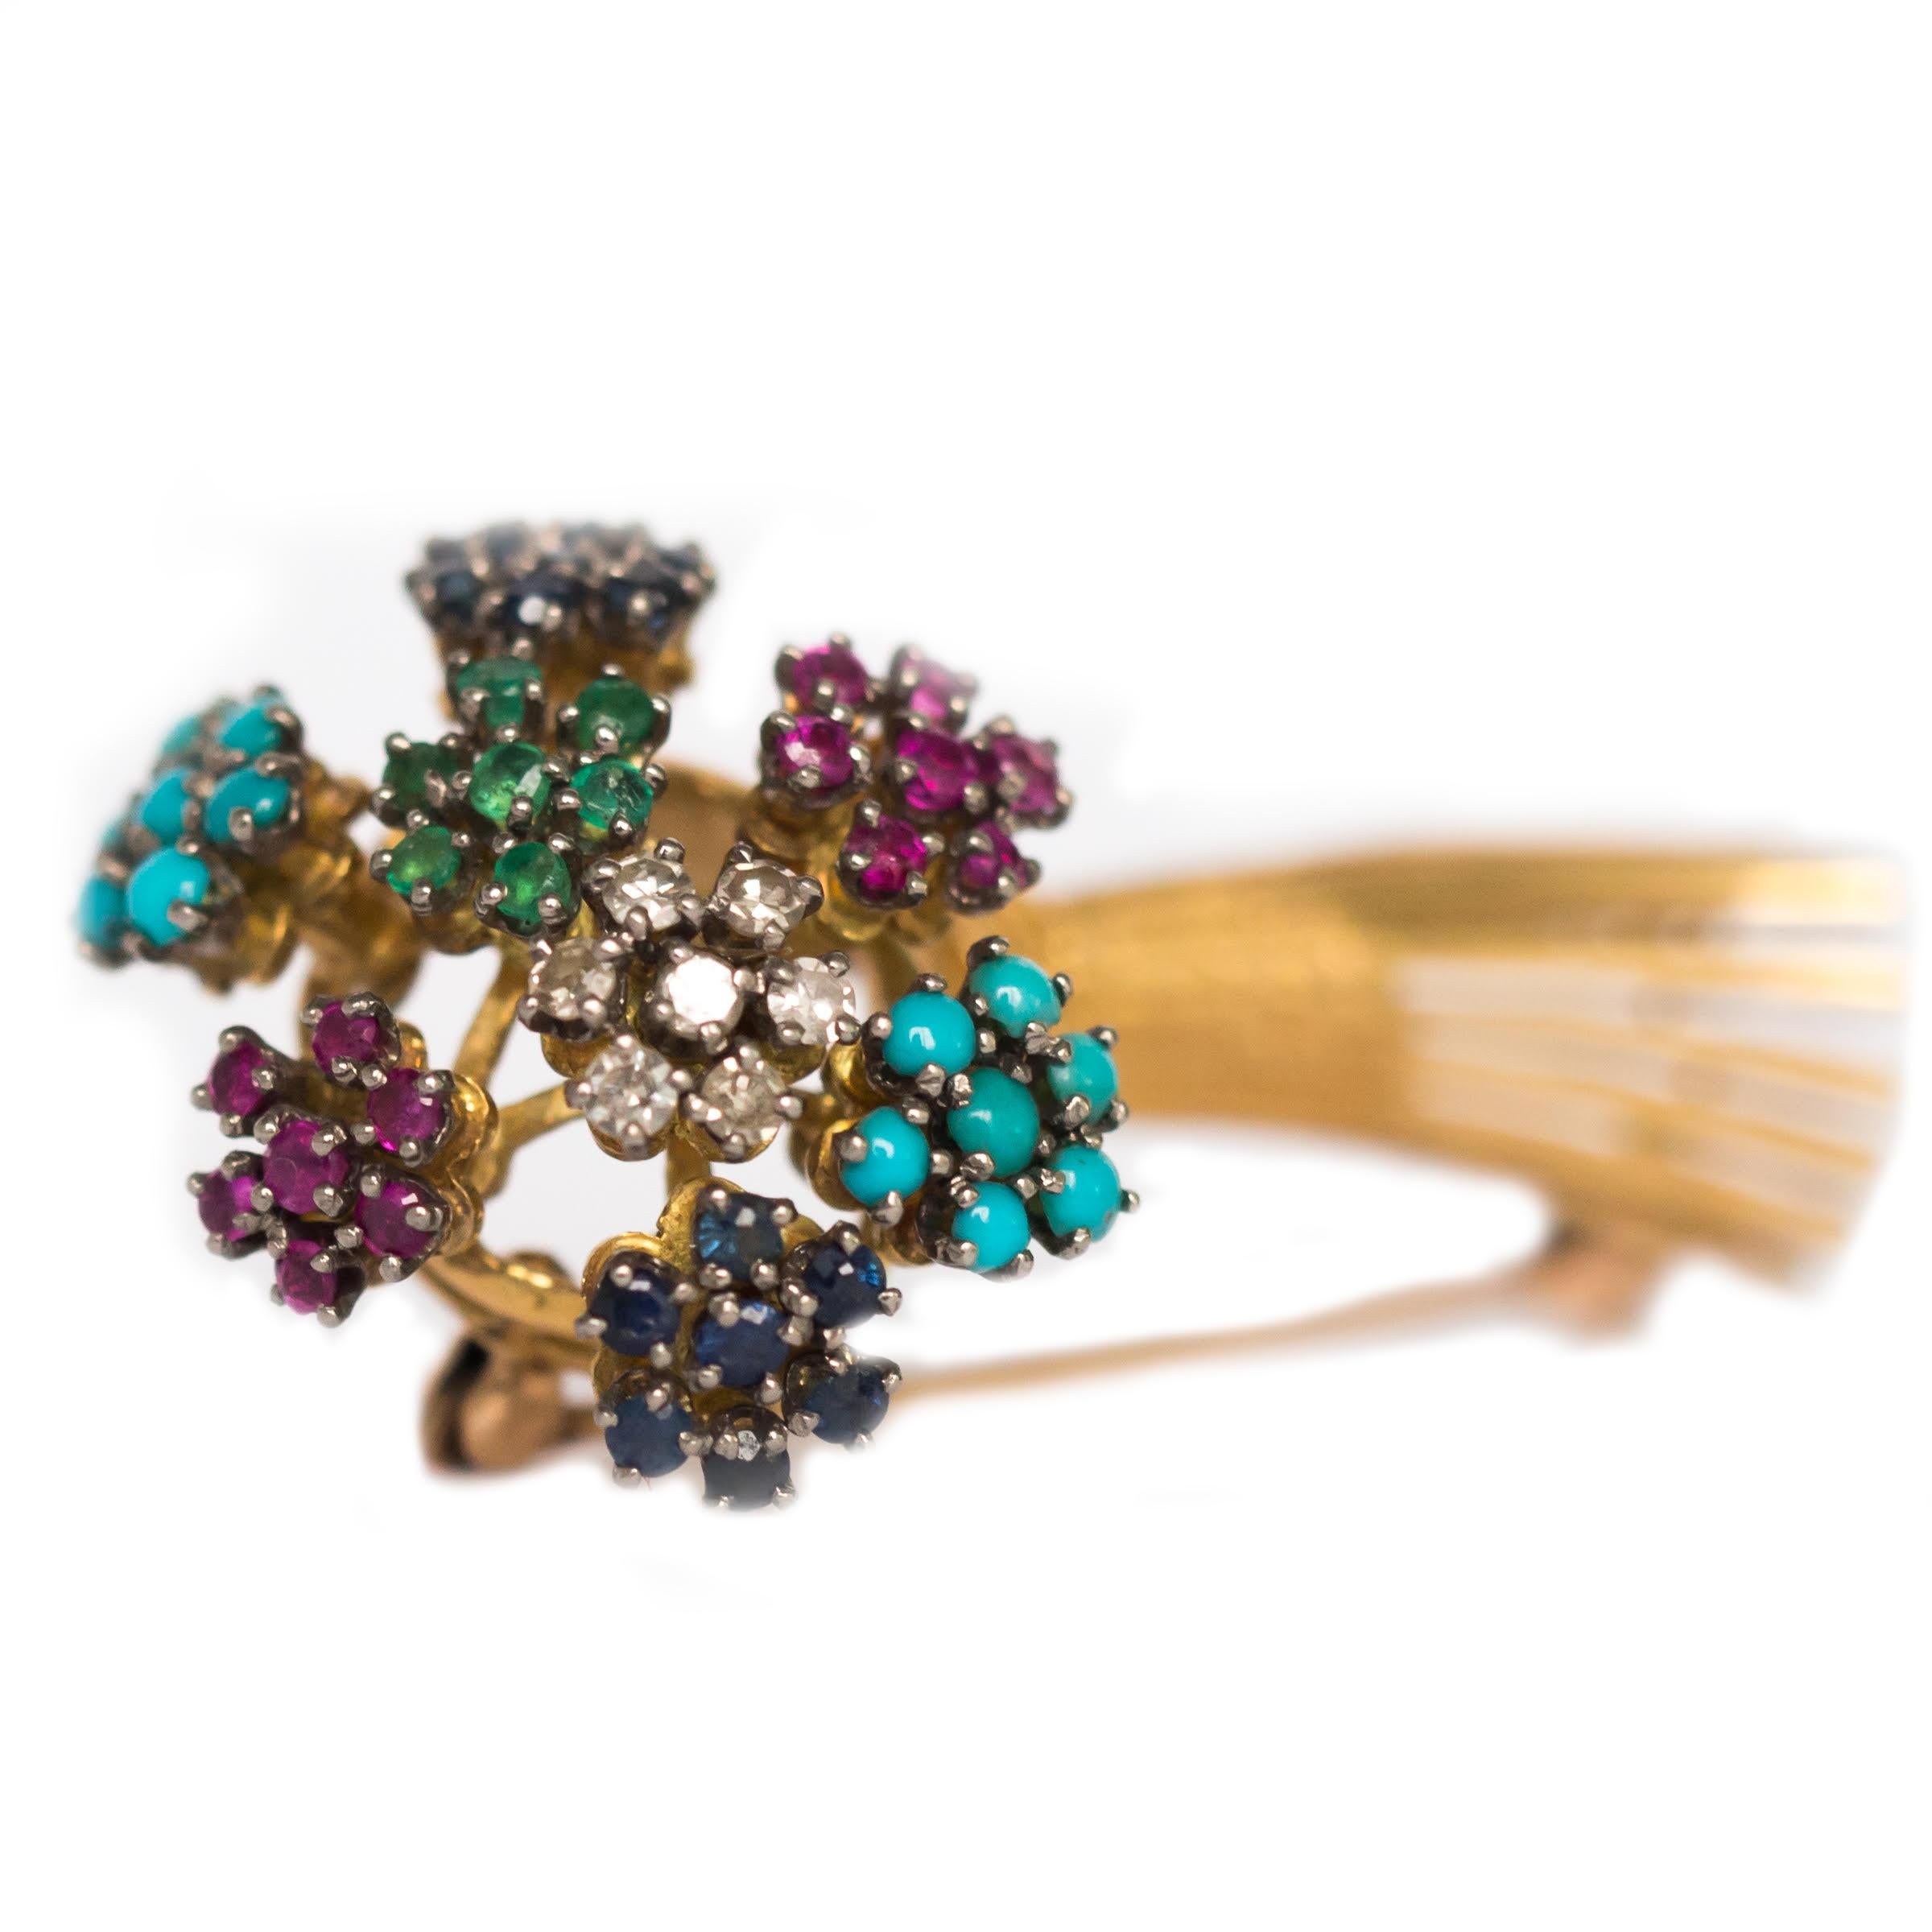 Designer: J. Rossi
Item Details: 
Length: 1.6 inches
Metal Type: 18 Karat Yellow Gold 
Weight: 10.2 grams

Color Stone Details: 
Type: Turquoise, Rubies, Emeralds, Sapphire, Diamonds
All Stone Total Carat Weight: 2.50 carat, total weight.
